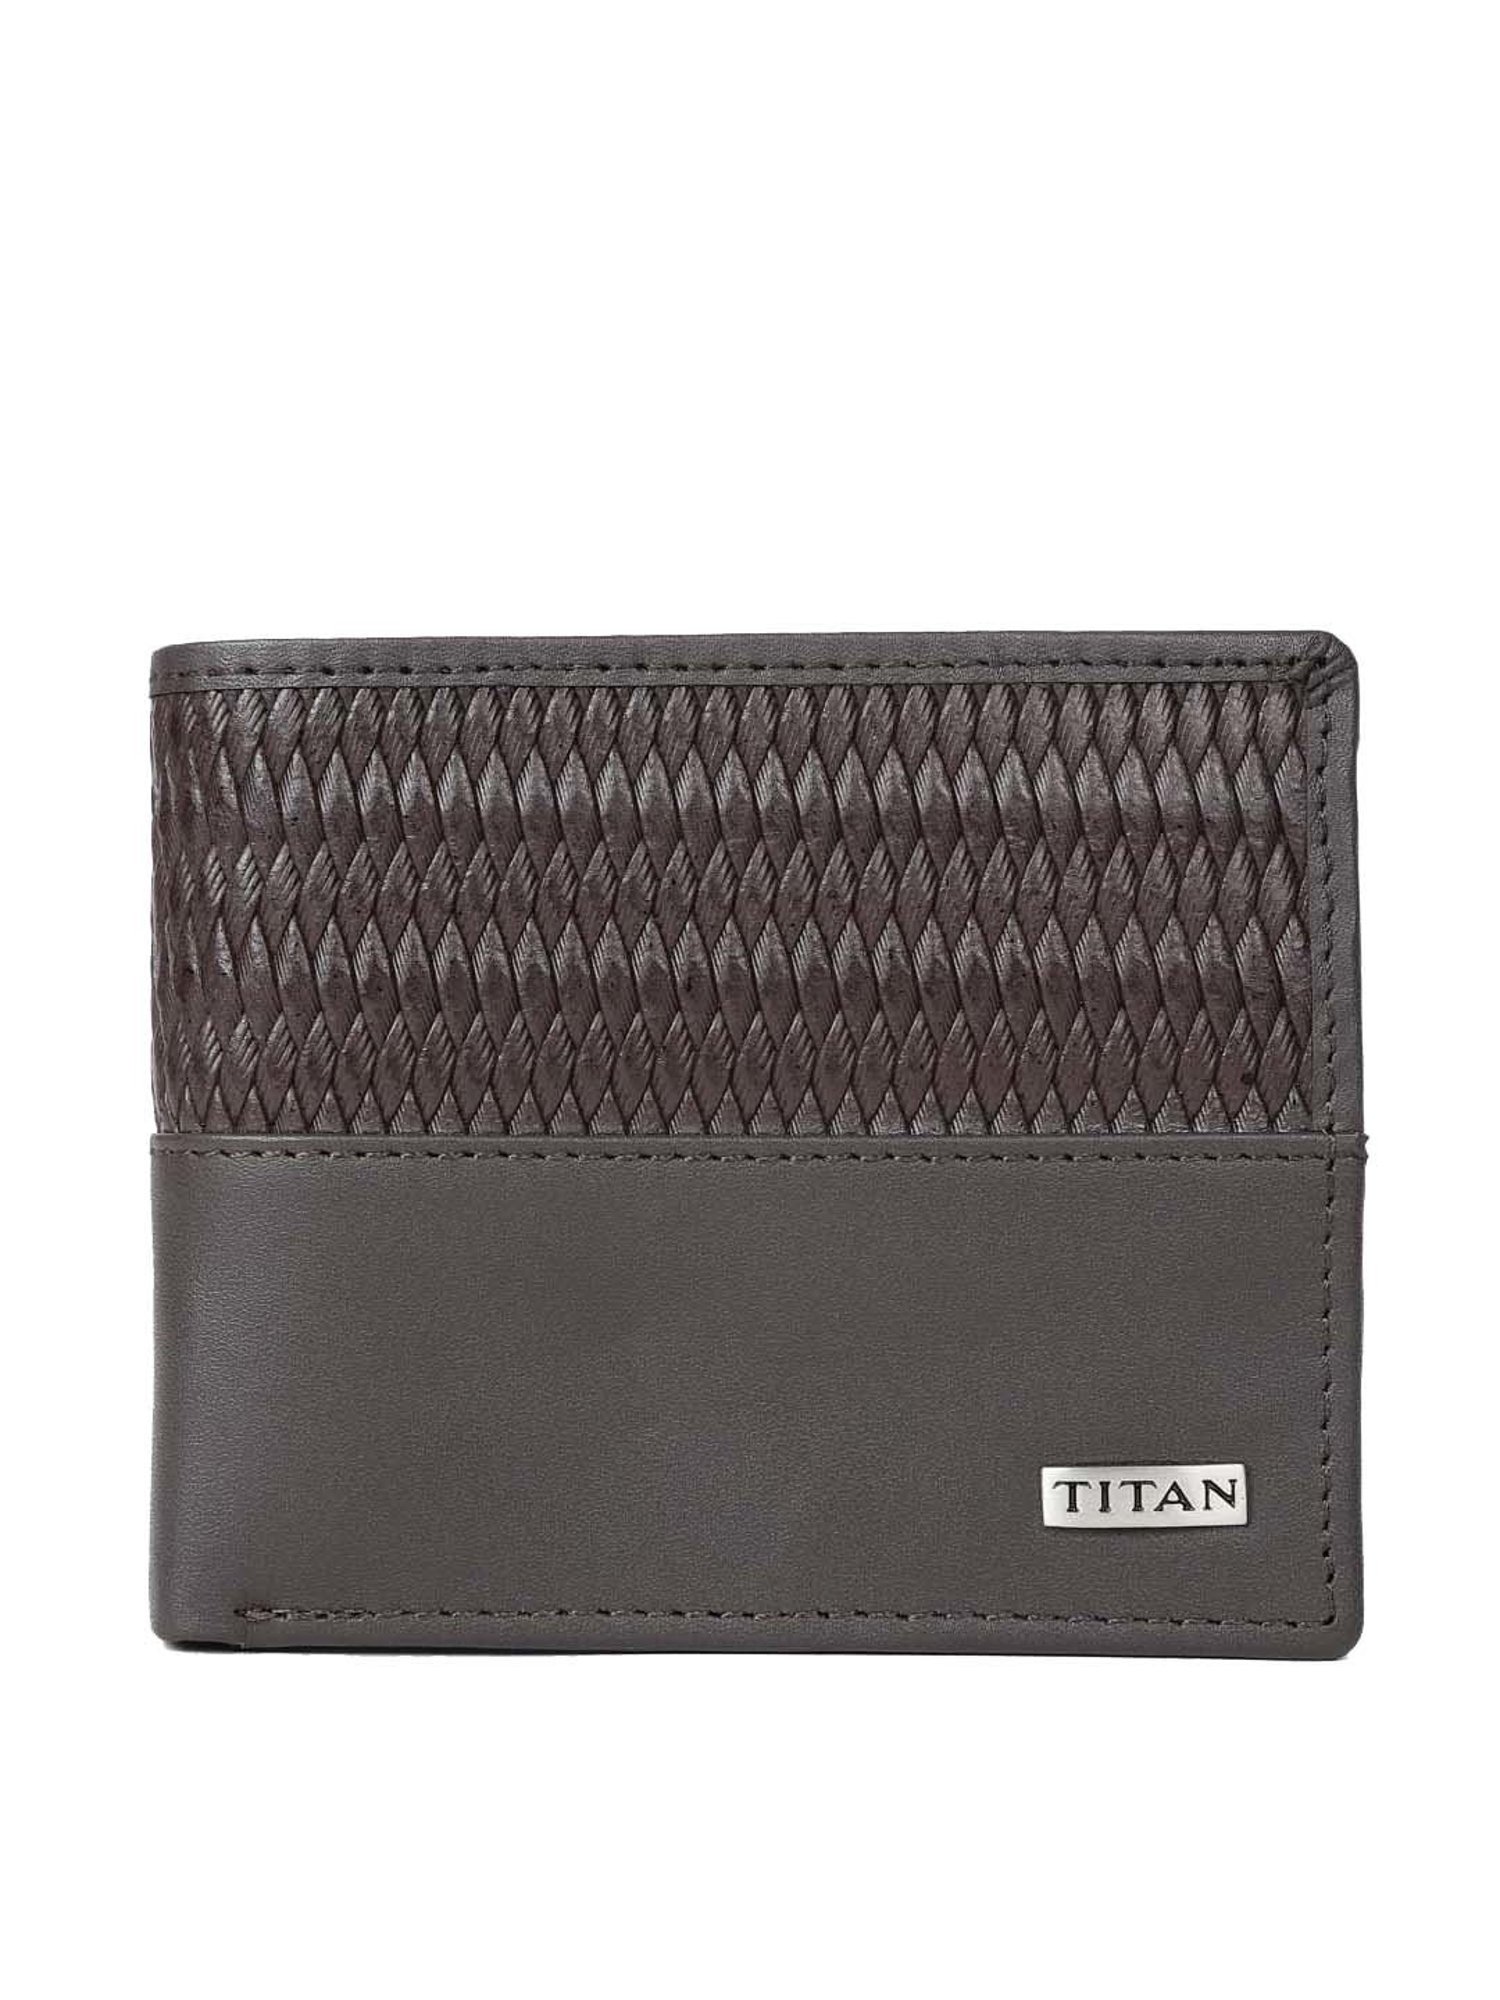 Mini Wallet for Men's with Pocket in Genuine Leather – Brown Bear